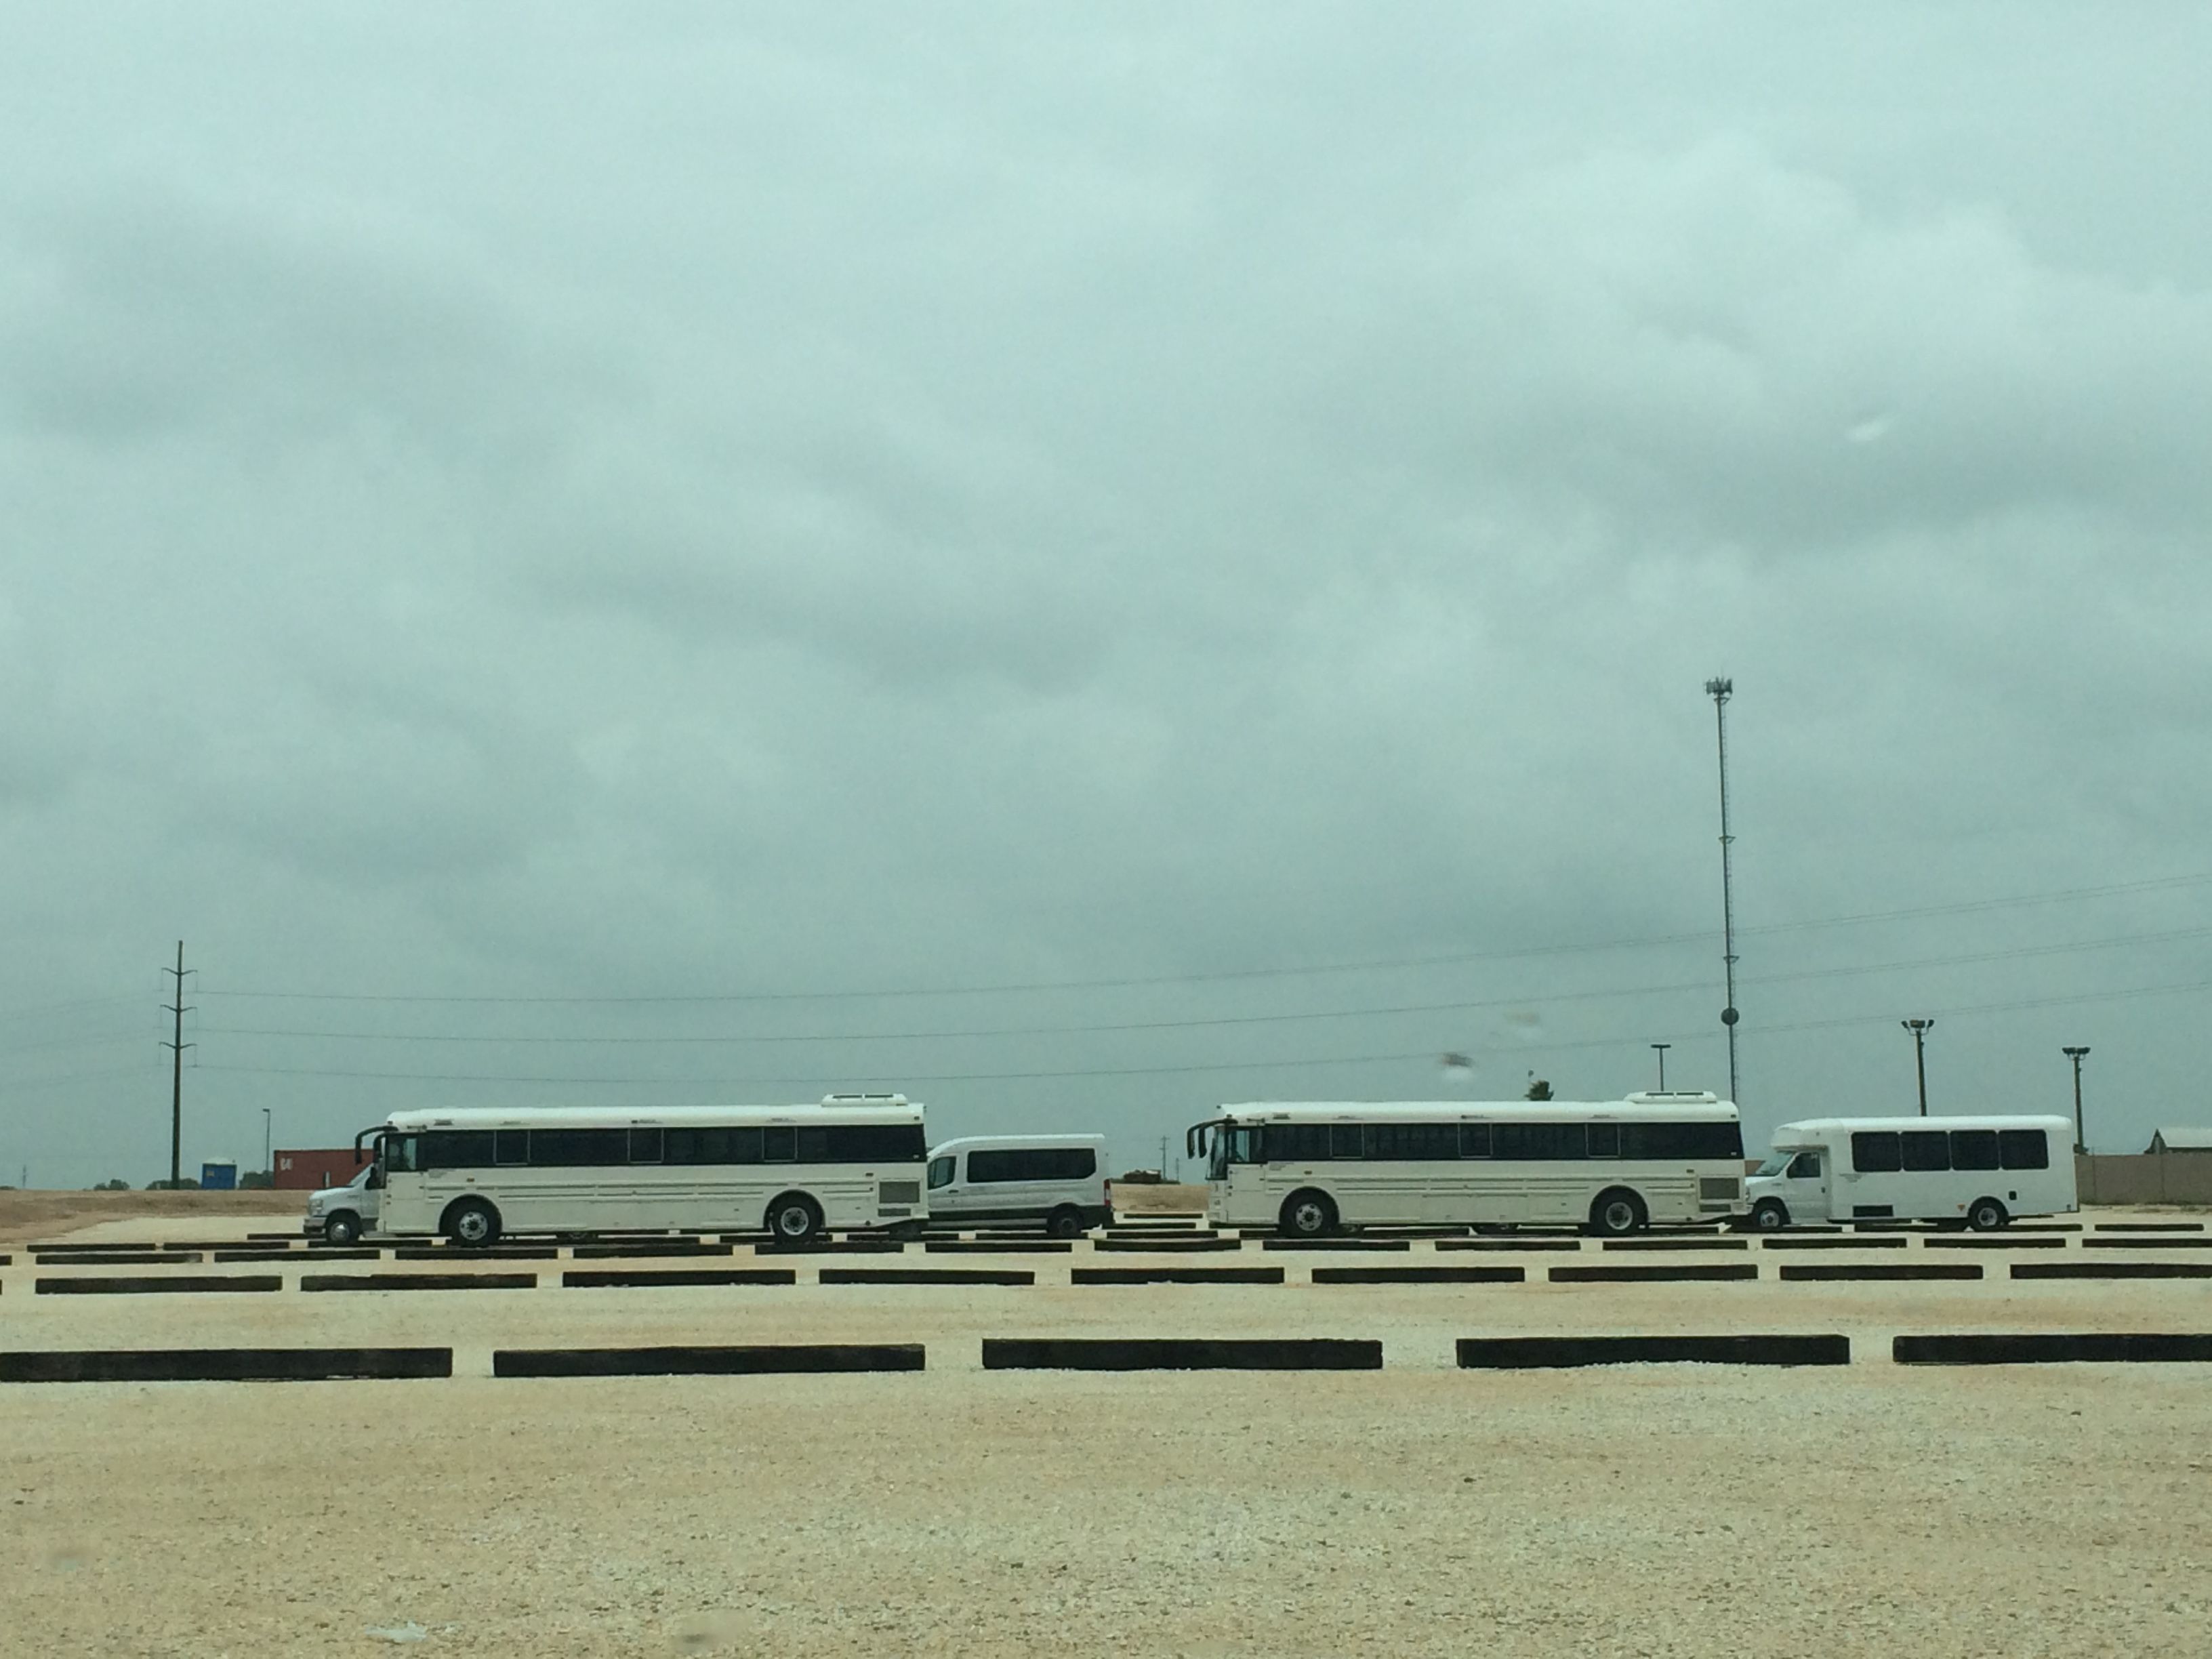 Buses used to transport asylum-seeking mothers and children wait outside a family detention center in Dilley, TX. Image by Emily Gogolak. United States, 2016.